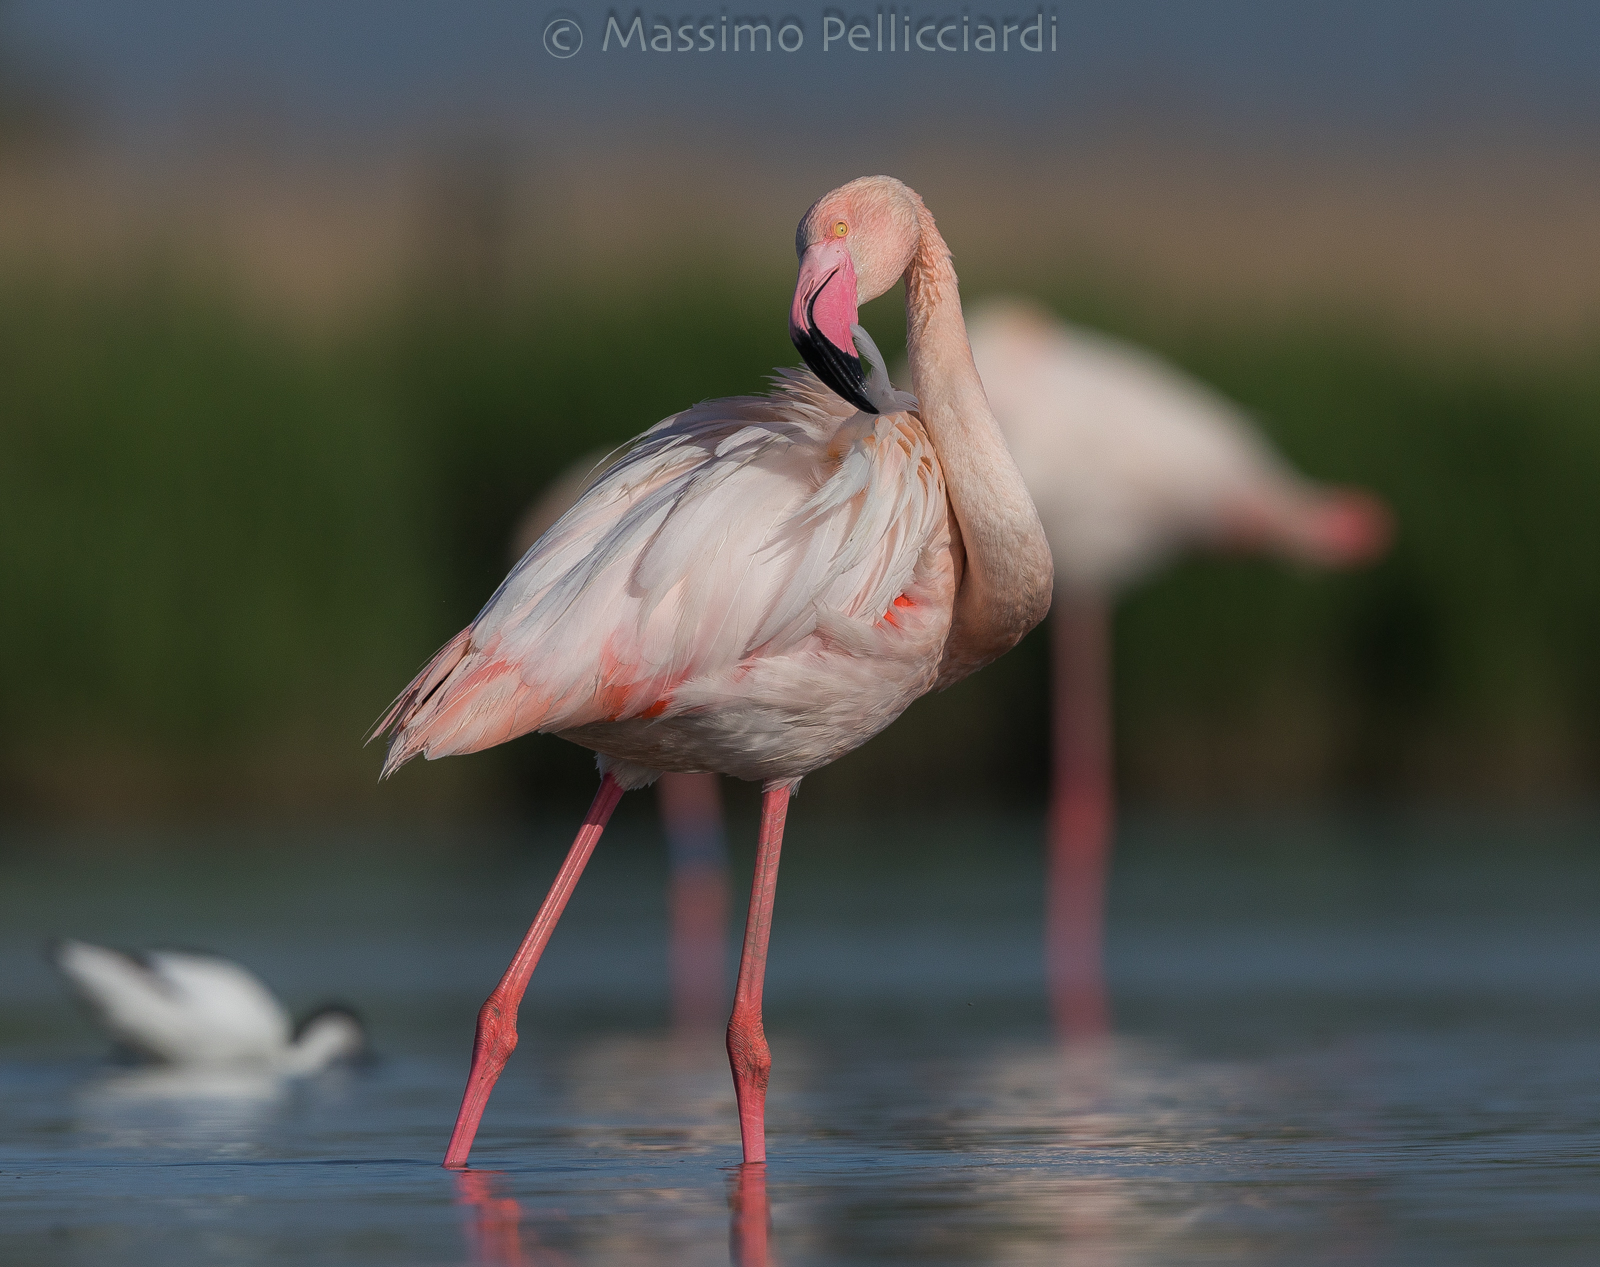 The Flamingo Cleaning...